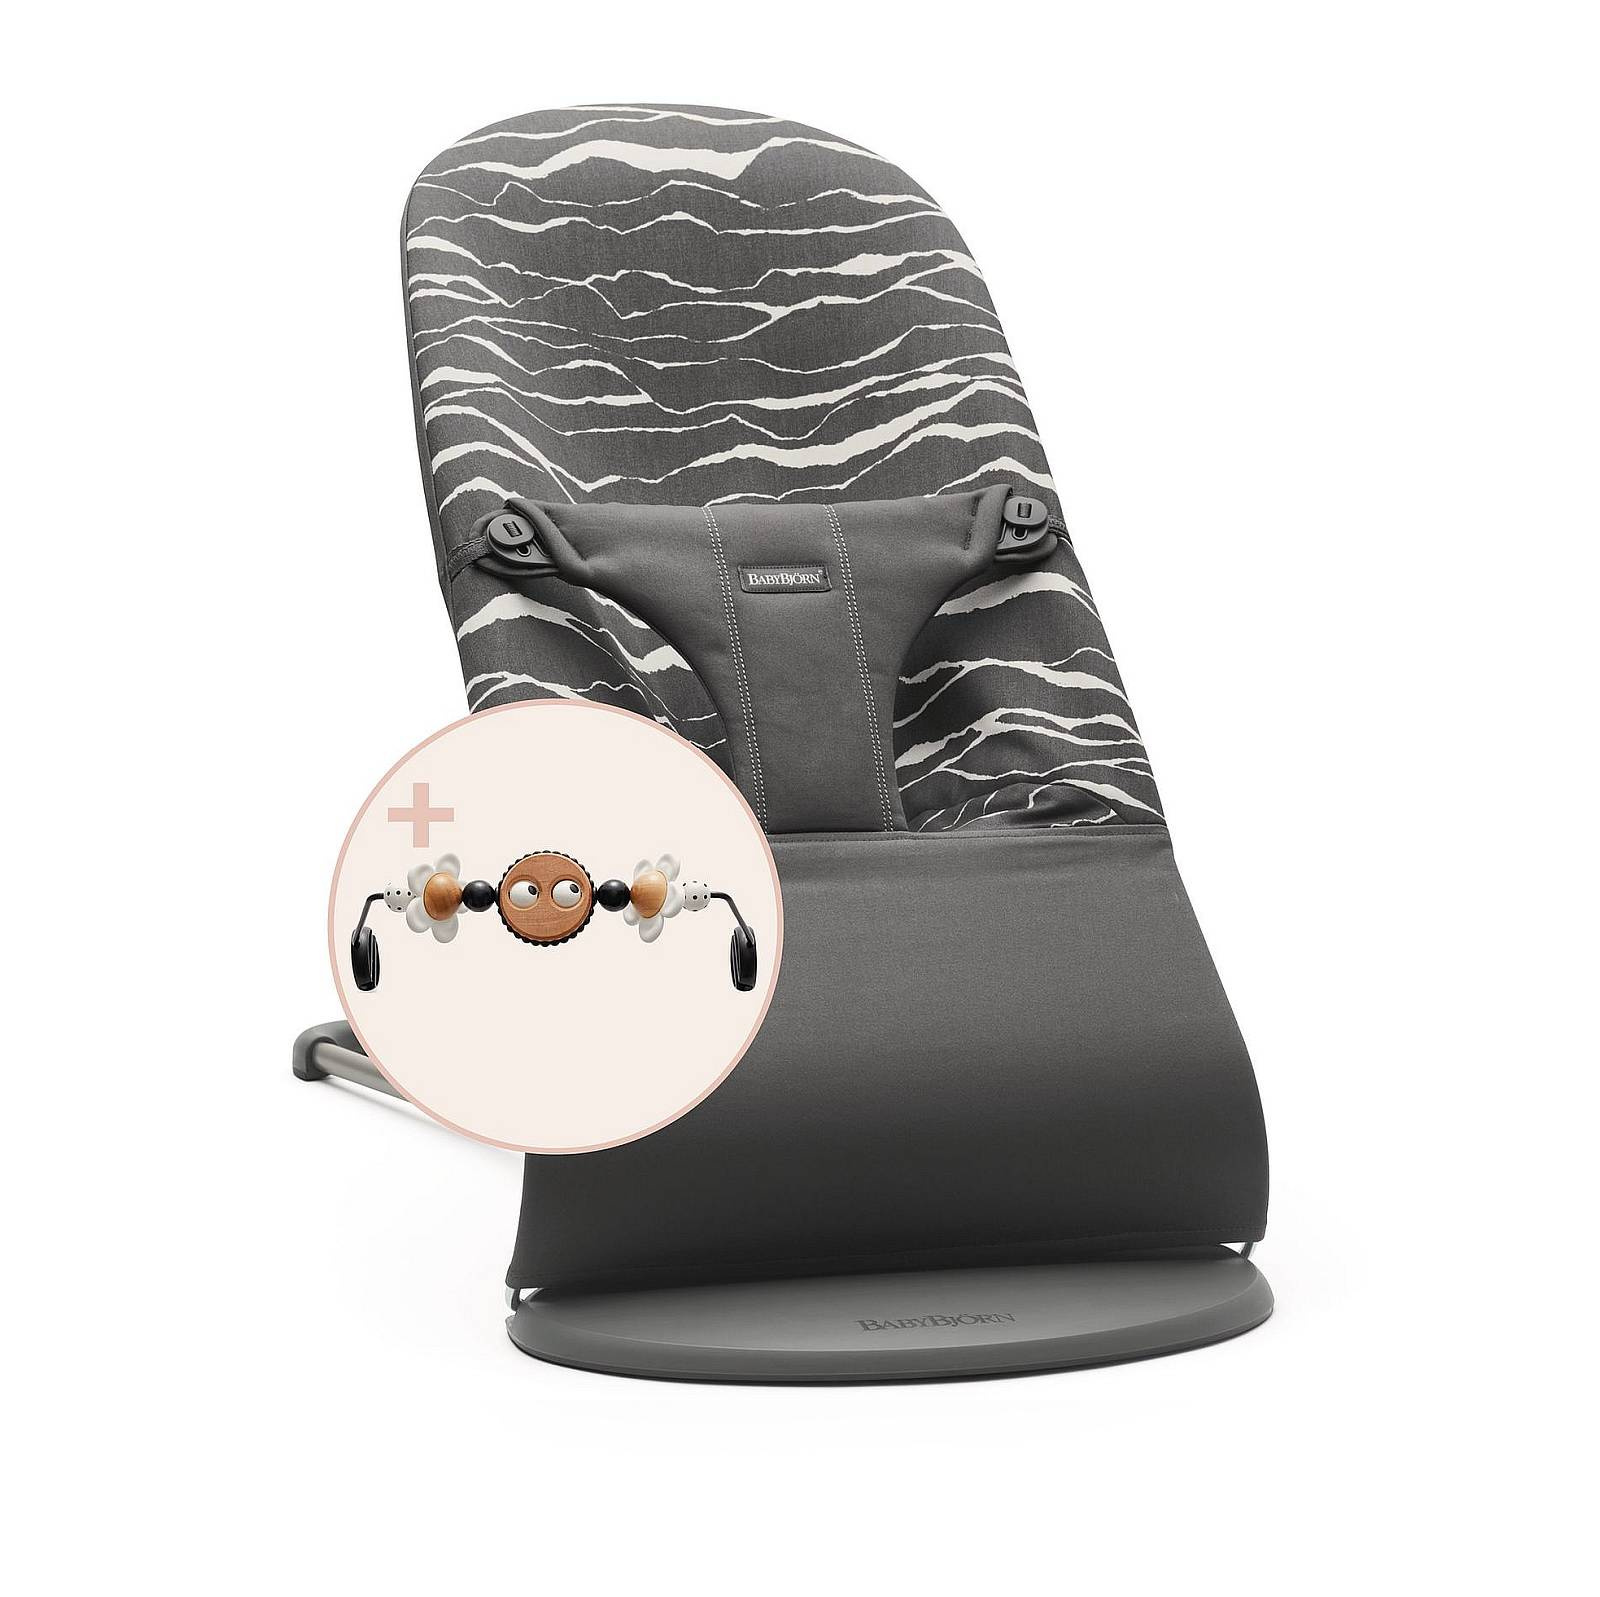 https://en.scandinavianbaby.pl/hpeciai/052d1283aa31974c5f963271bfbabe89/eng_pl_BABYBJORN-Bouncer-Bliss-Cotton-Anthracite-Landscape-Print-Toy-Googly-Eyes-Black-and-White-17005_4.jpg